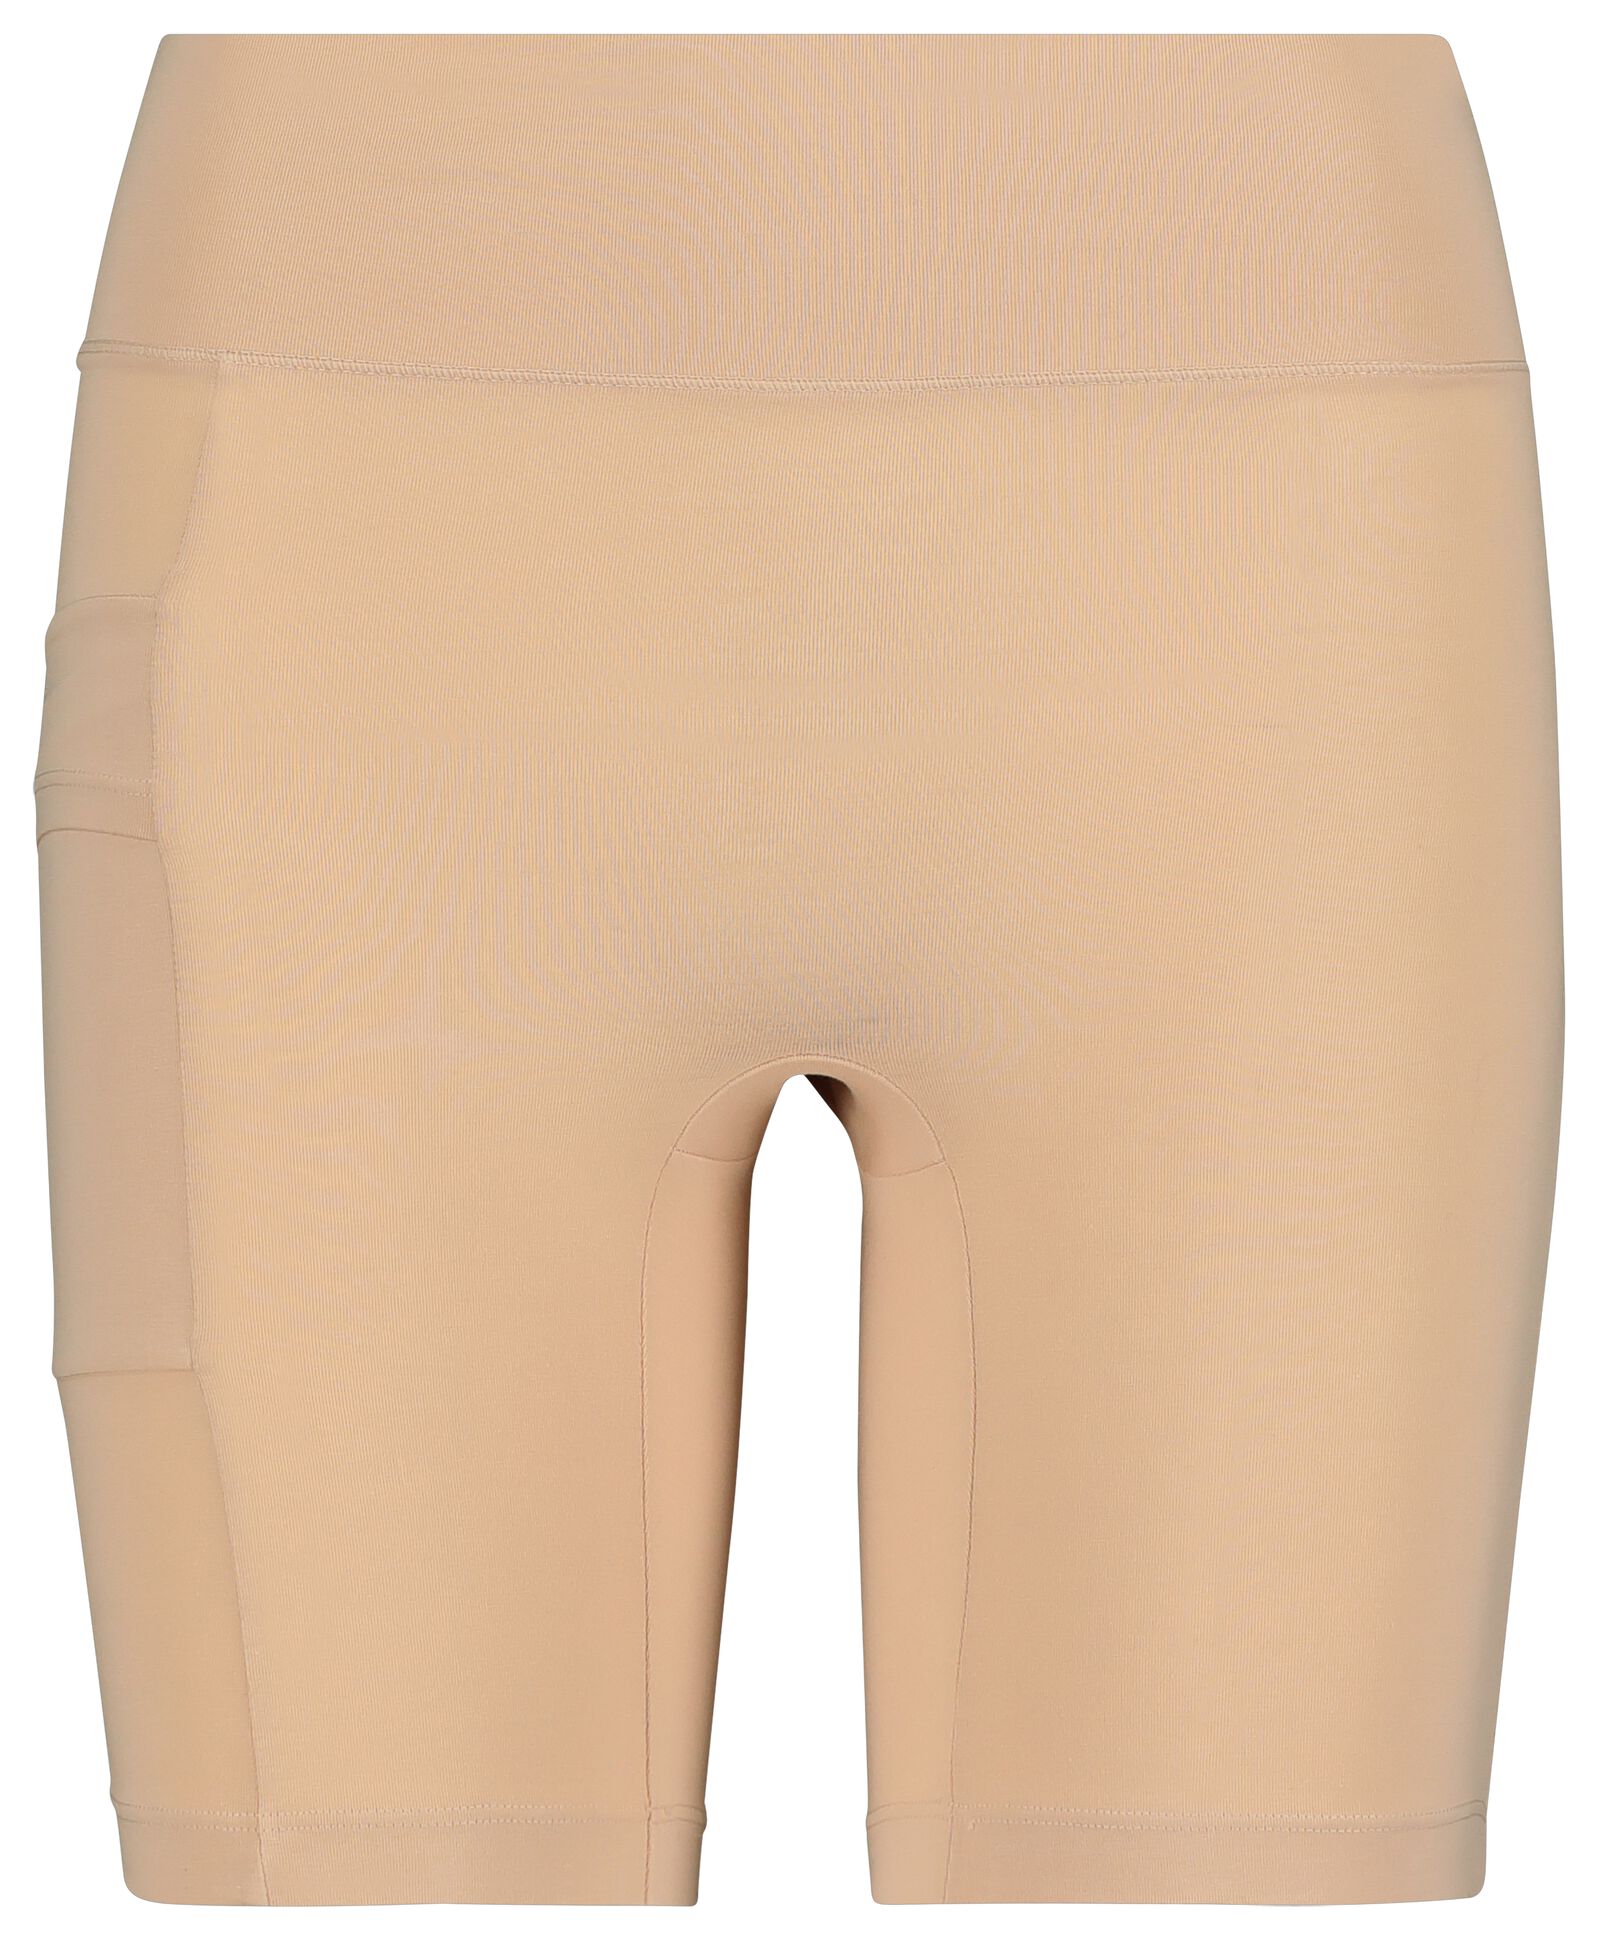 cycliste femme real lasting cotton beige S - 19606171 - HEMA